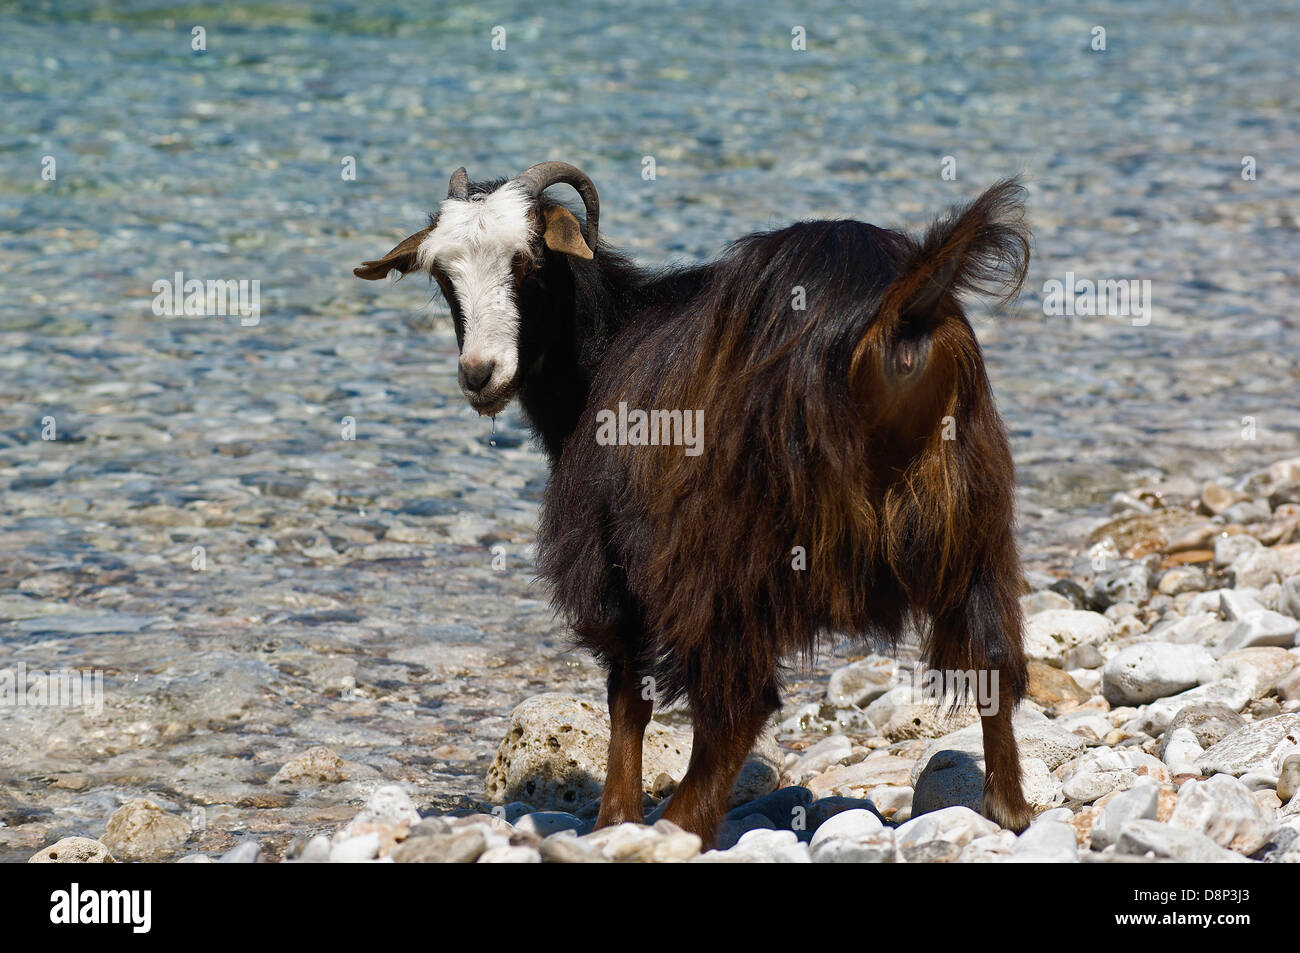 Goat standing on a pebble beach (Greece) Stock Photo